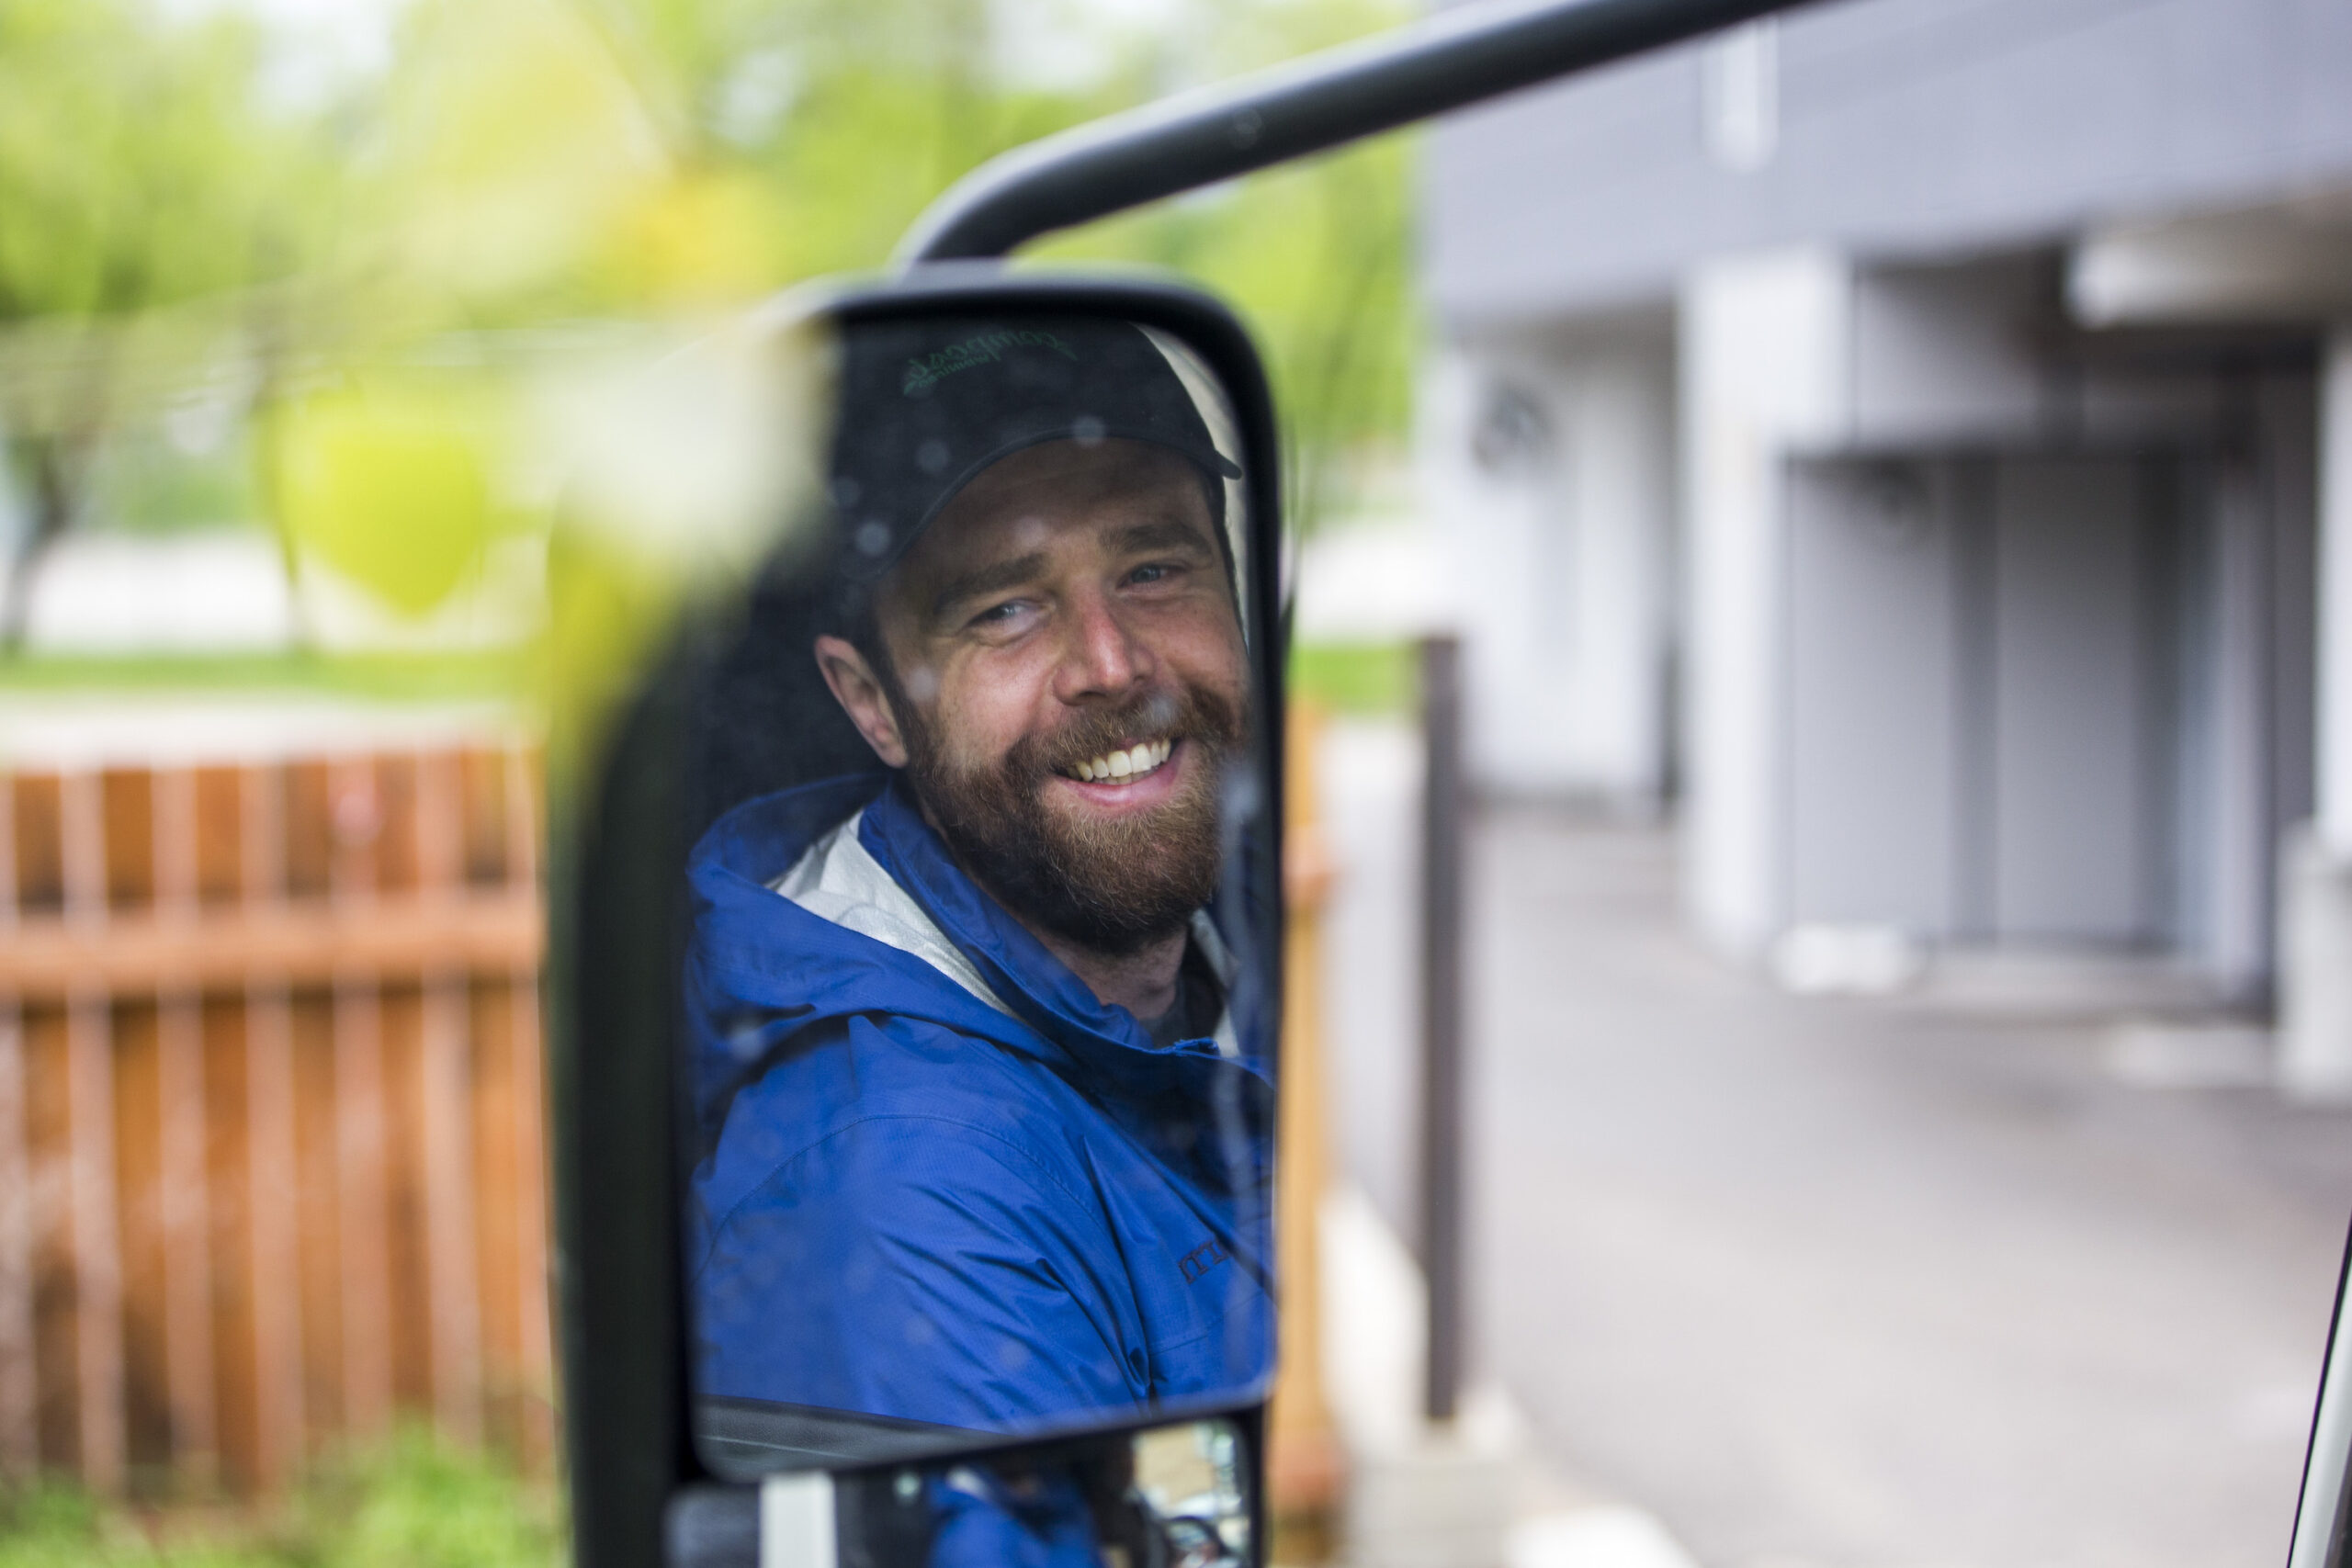 Compost courier Garrett LeBlanc smiles for a portrait in the side mirror of his compost truck during his route